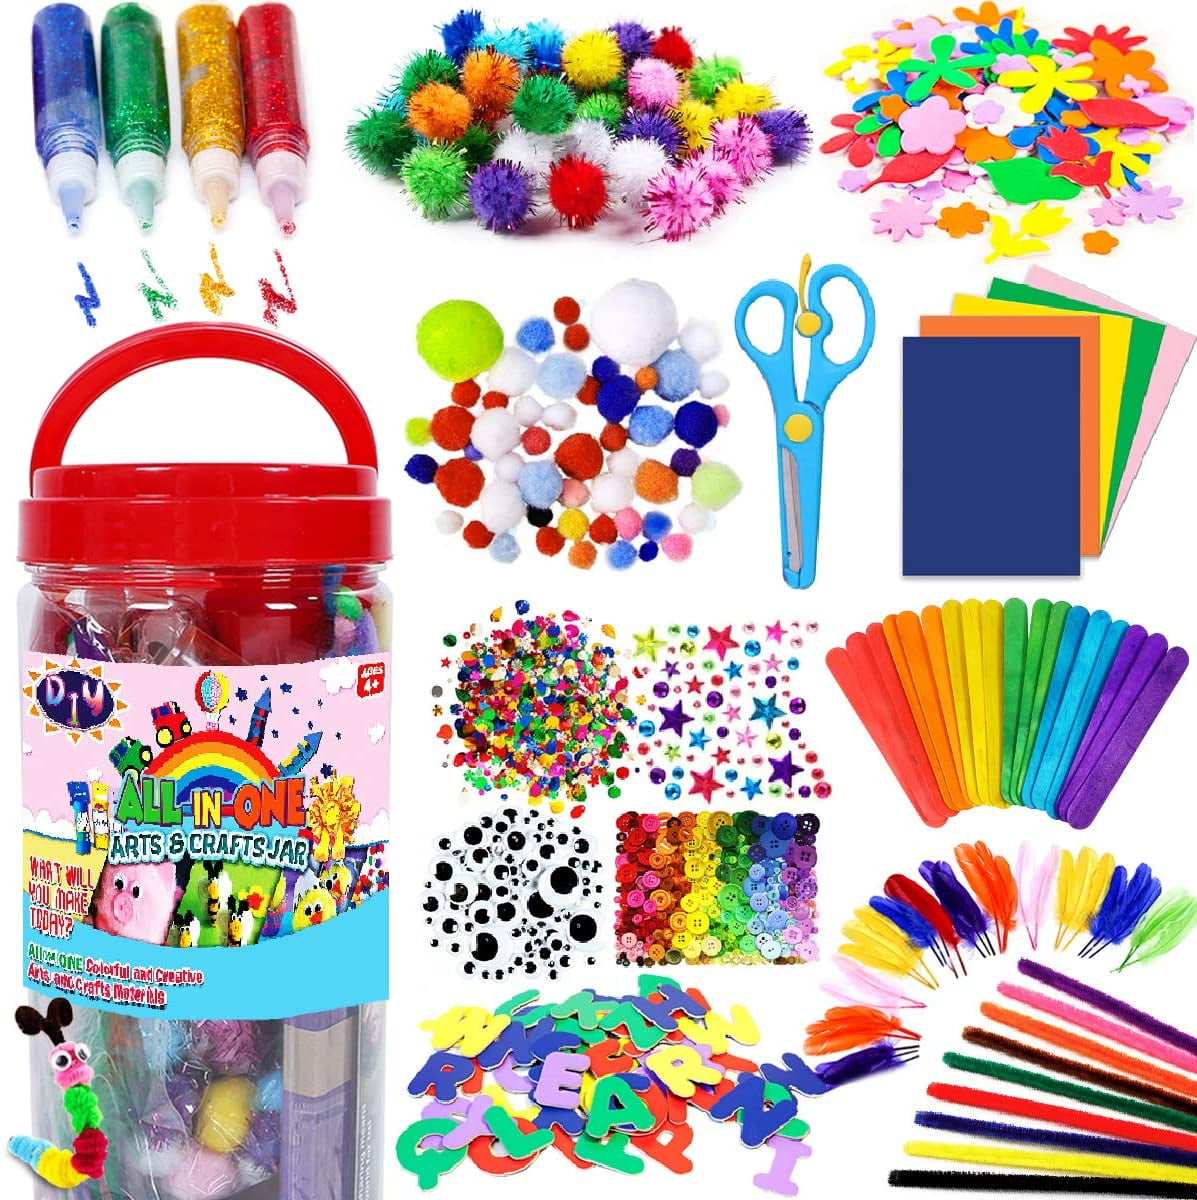 All in One DIY Crafts Set Letter Beads Arts and Crafts Supplies for Kids Girls Ages 4 5 6 7 8 9 10 Toddler Art Craft Supplies Kit for School Activities Pipe Cleaners Pom Poms 